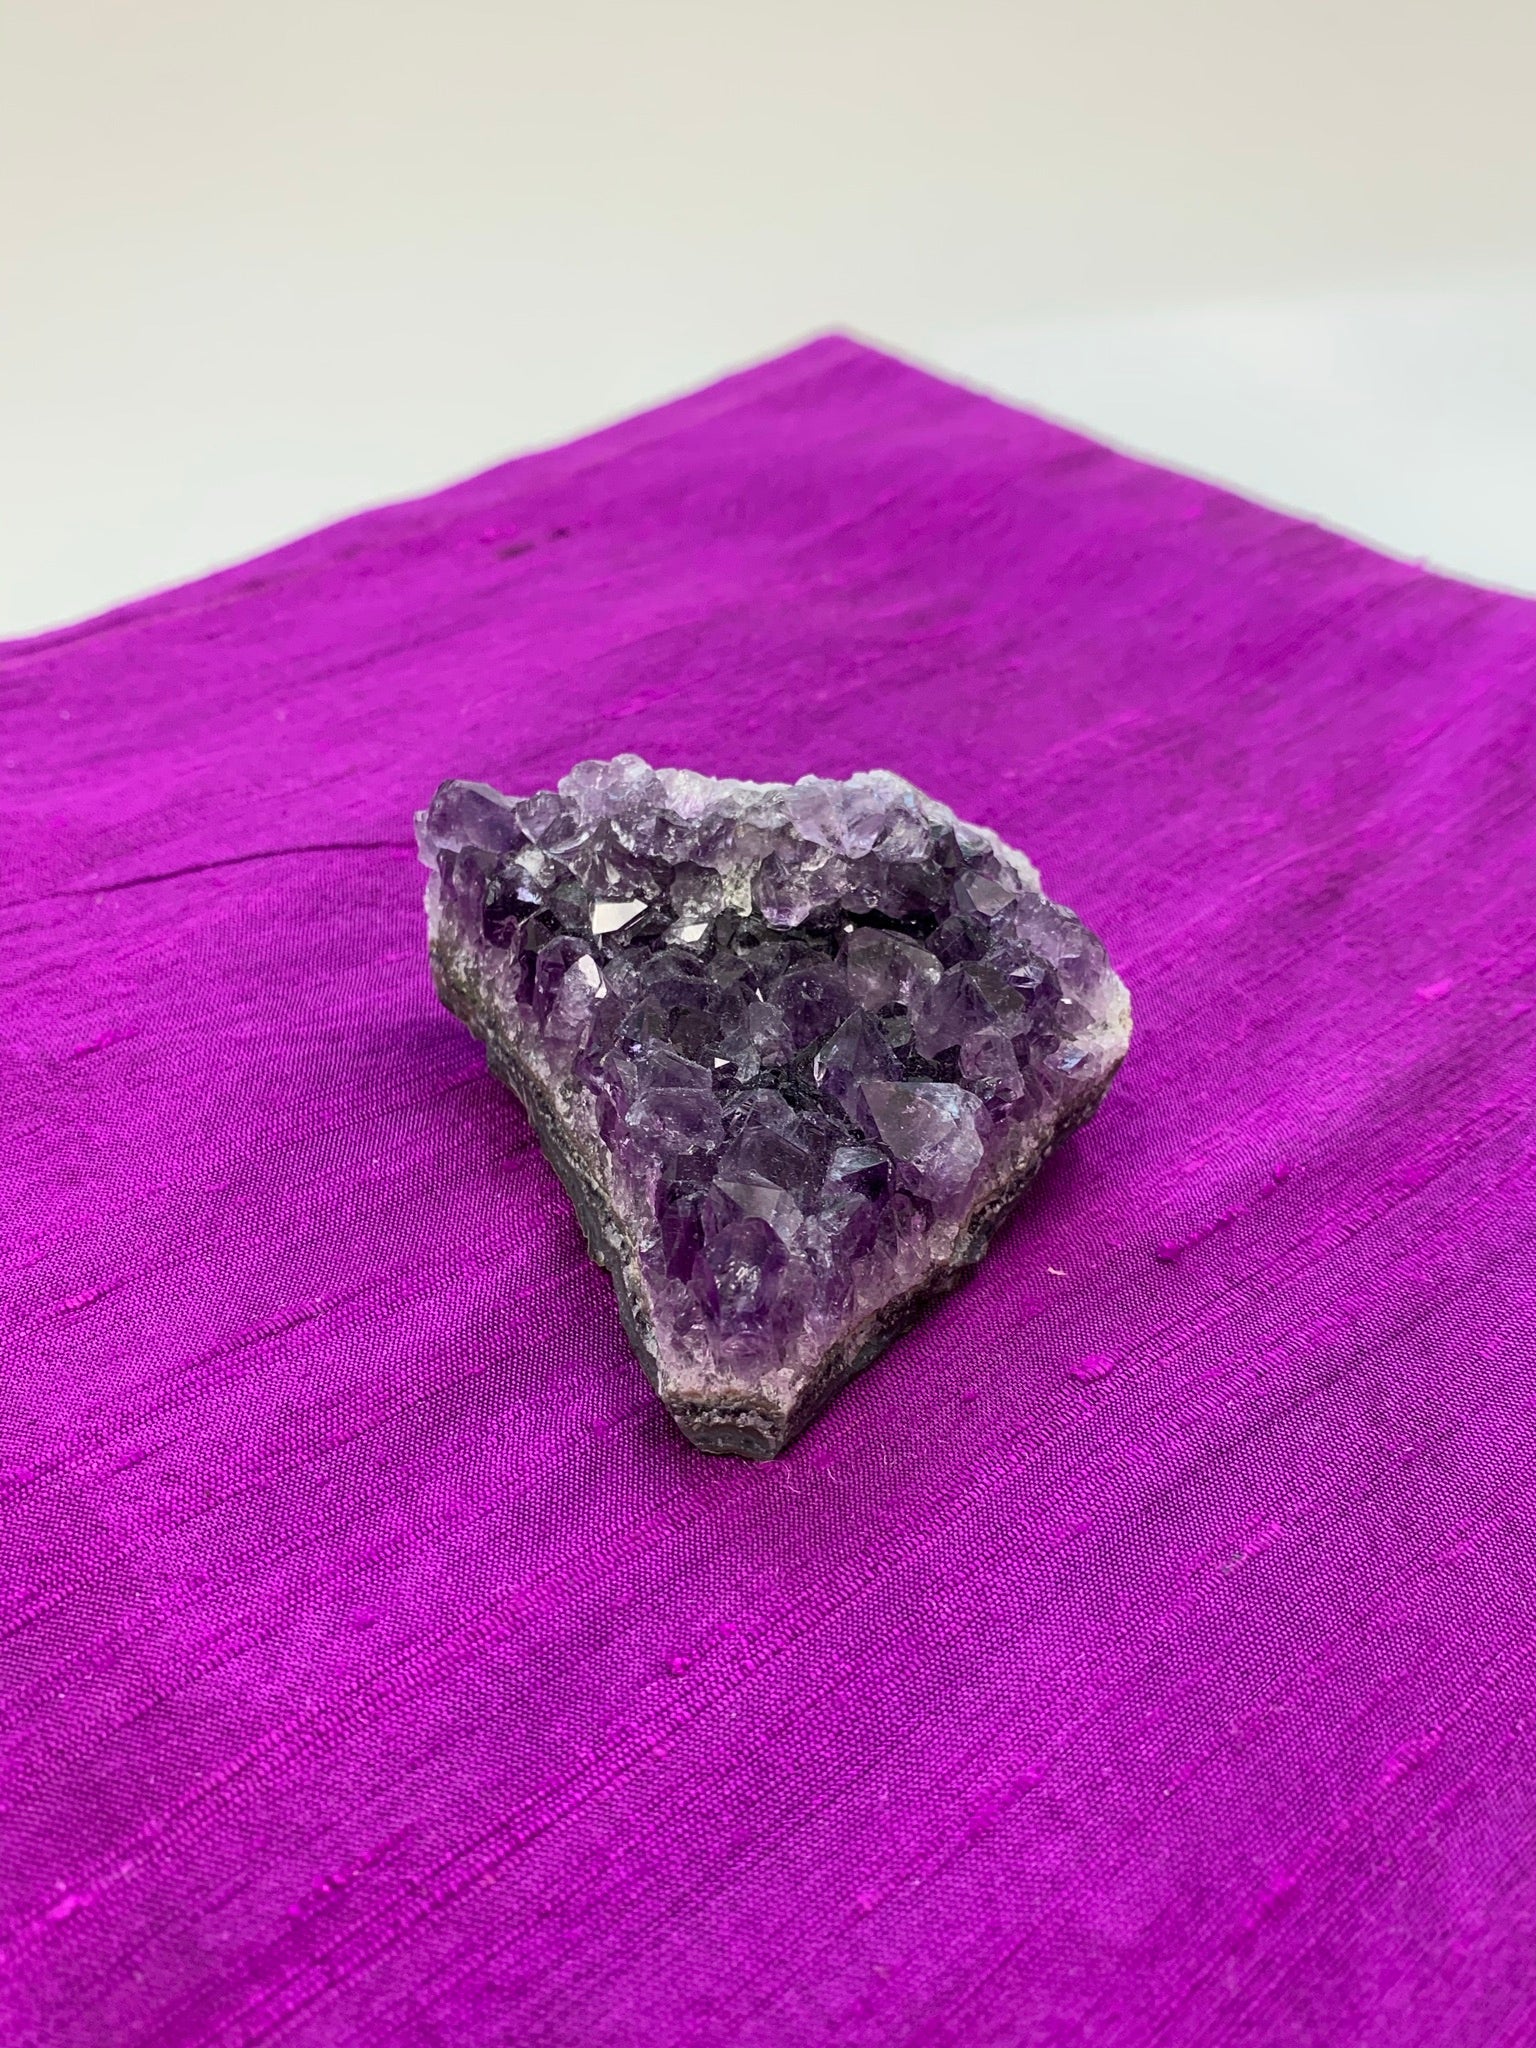 Amethyst geode piece - great quality and color. Size varies, but the average weight is 4.4oz. Each piece is unique in shape.